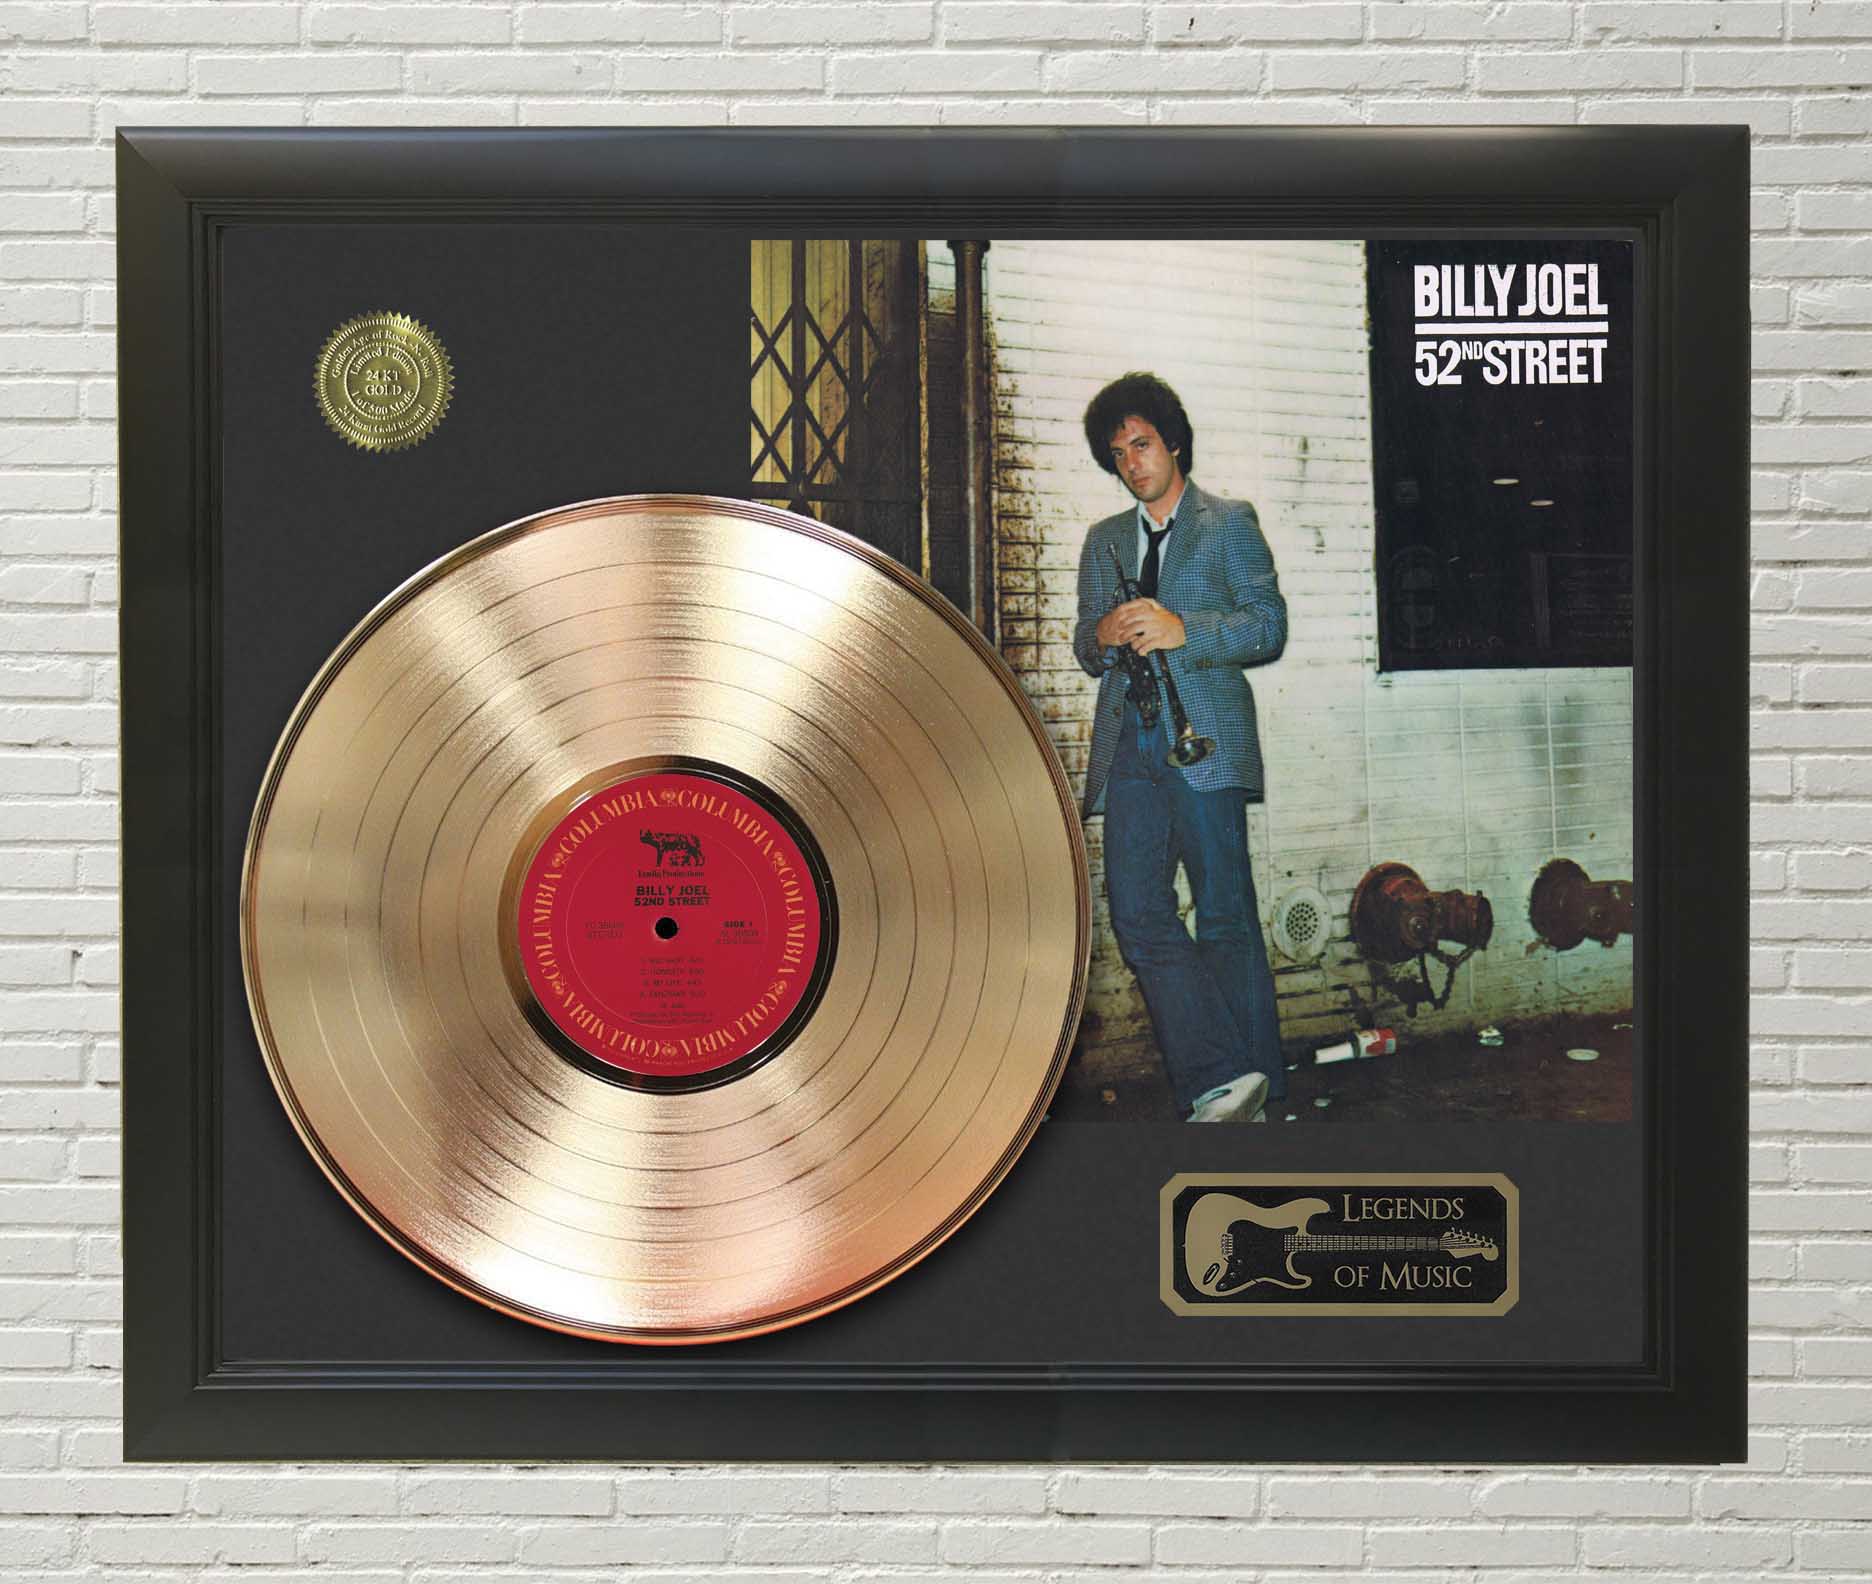 hegn kat Pil Billy Joel – 52nd Street Framed Gold Record LP Display C3 - Gold Record  Outlet Album and Disc Collectible Memorabilia